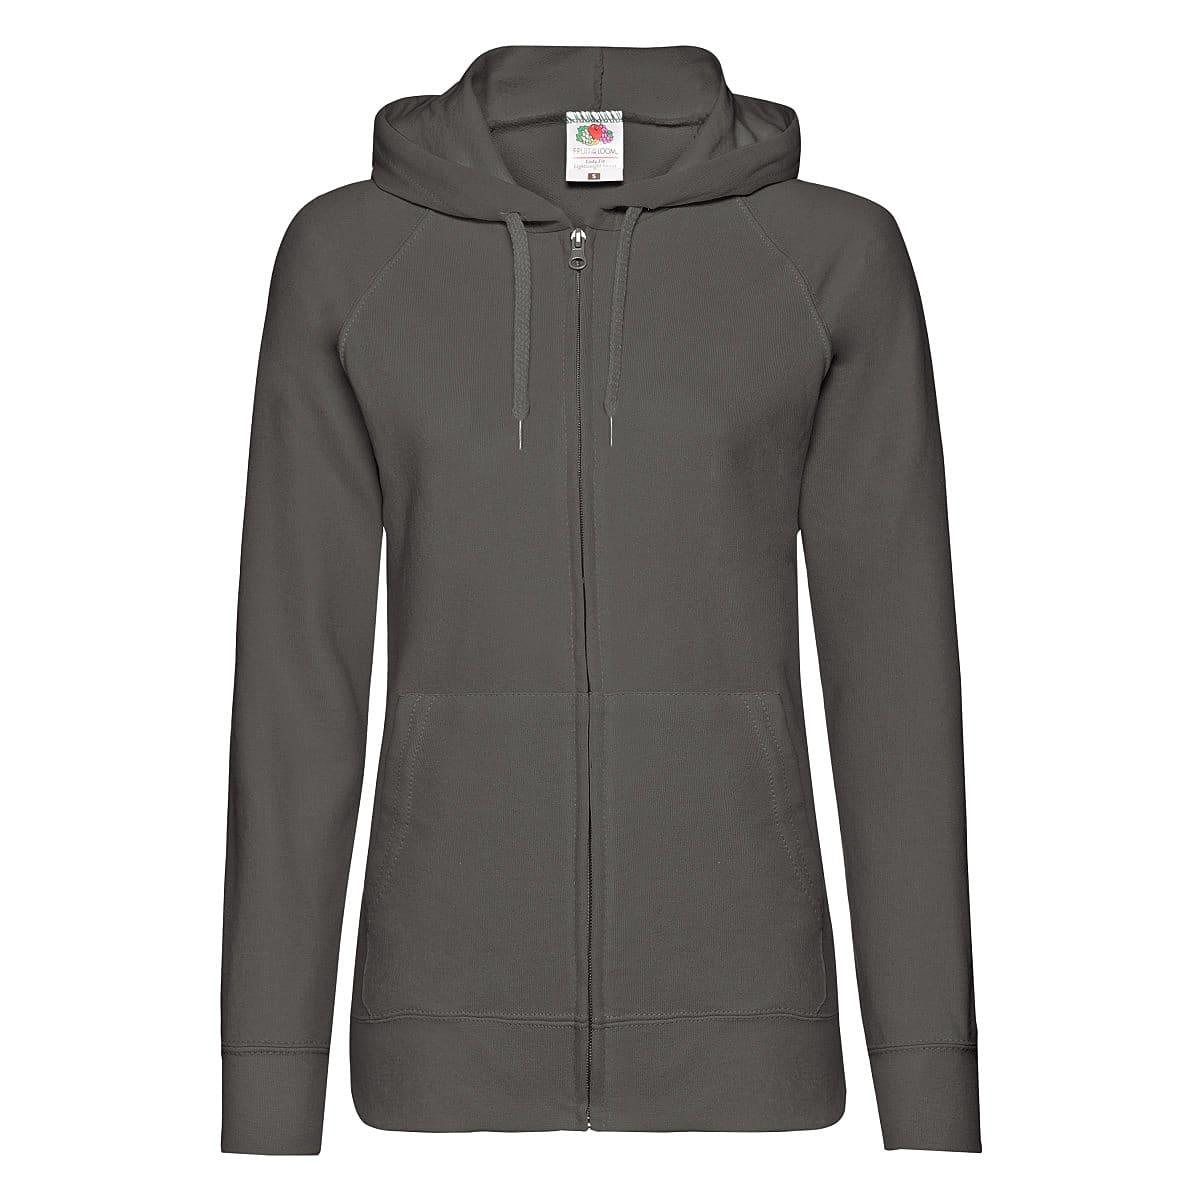 Fruit Of The Loom Lady-Fit Lightweight Full-Zip Hoodie in Light Graphite (Product Code: 62150)